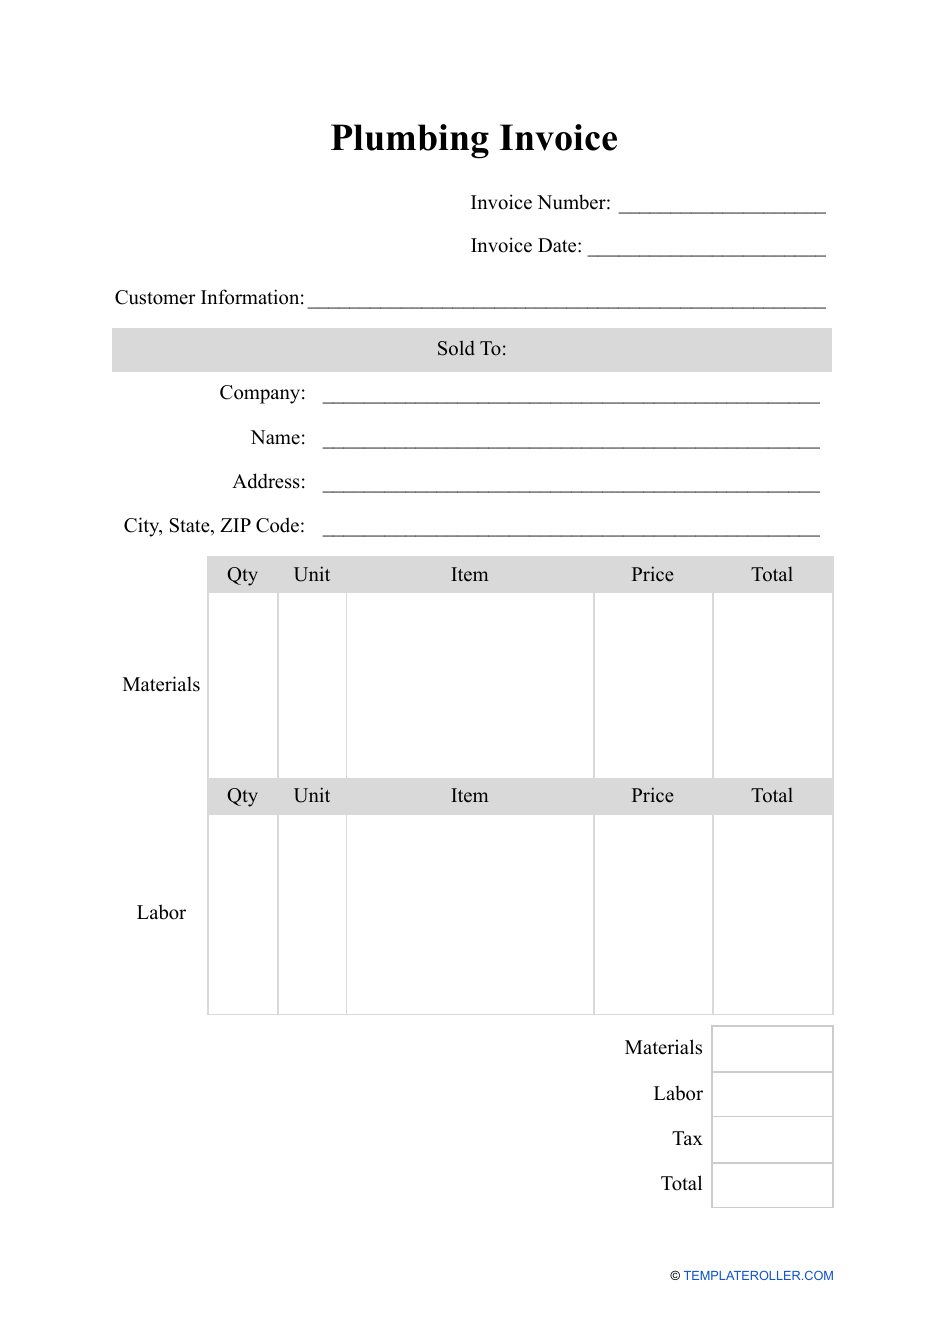 plumbing-invoice-template-fill-out-sign-online-and-download-pdf